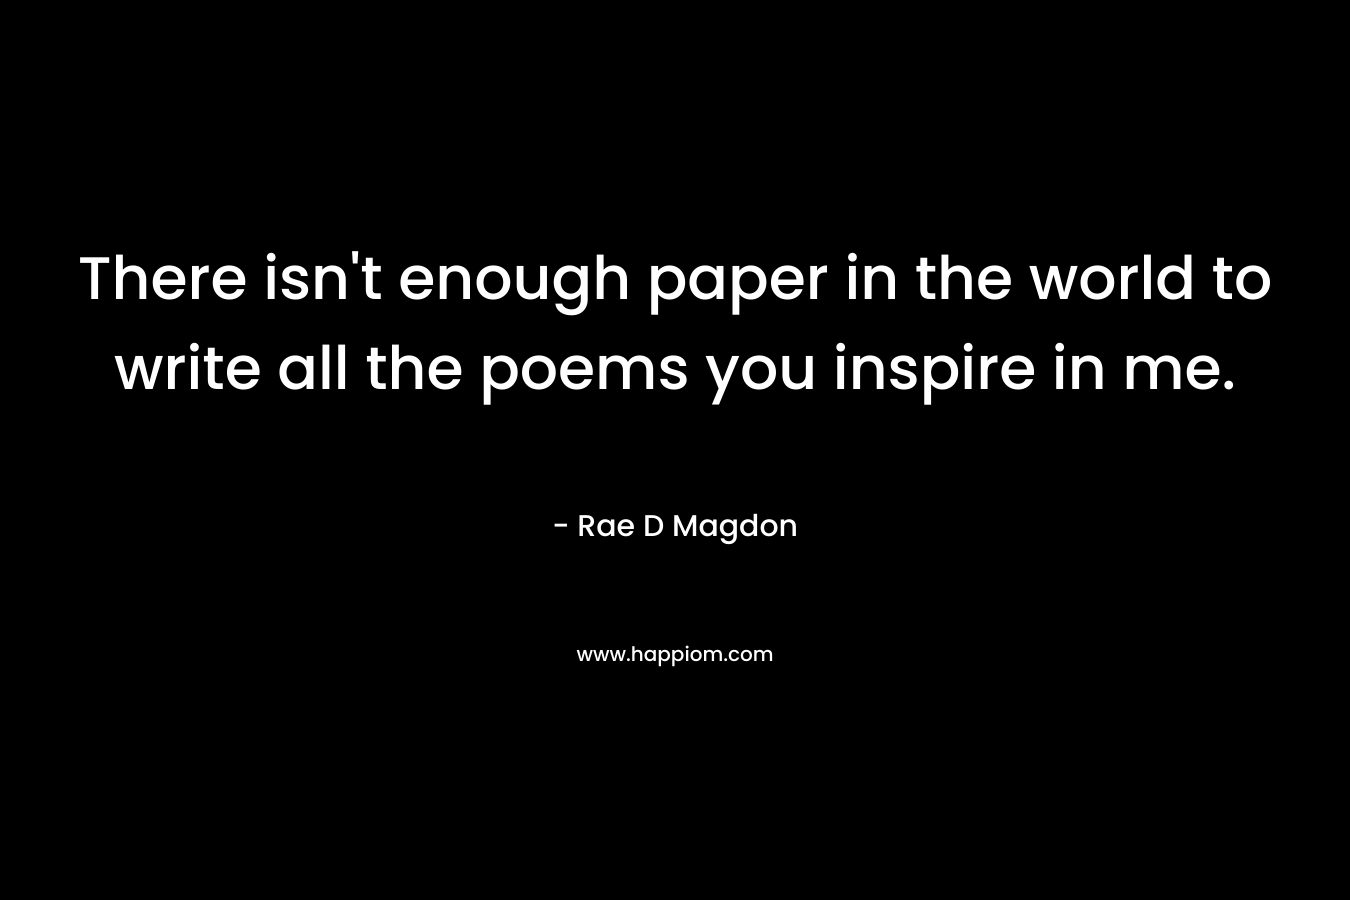 There isn’t enough paper in the world to write all the poems you inspire in me. – Rae D Magdon